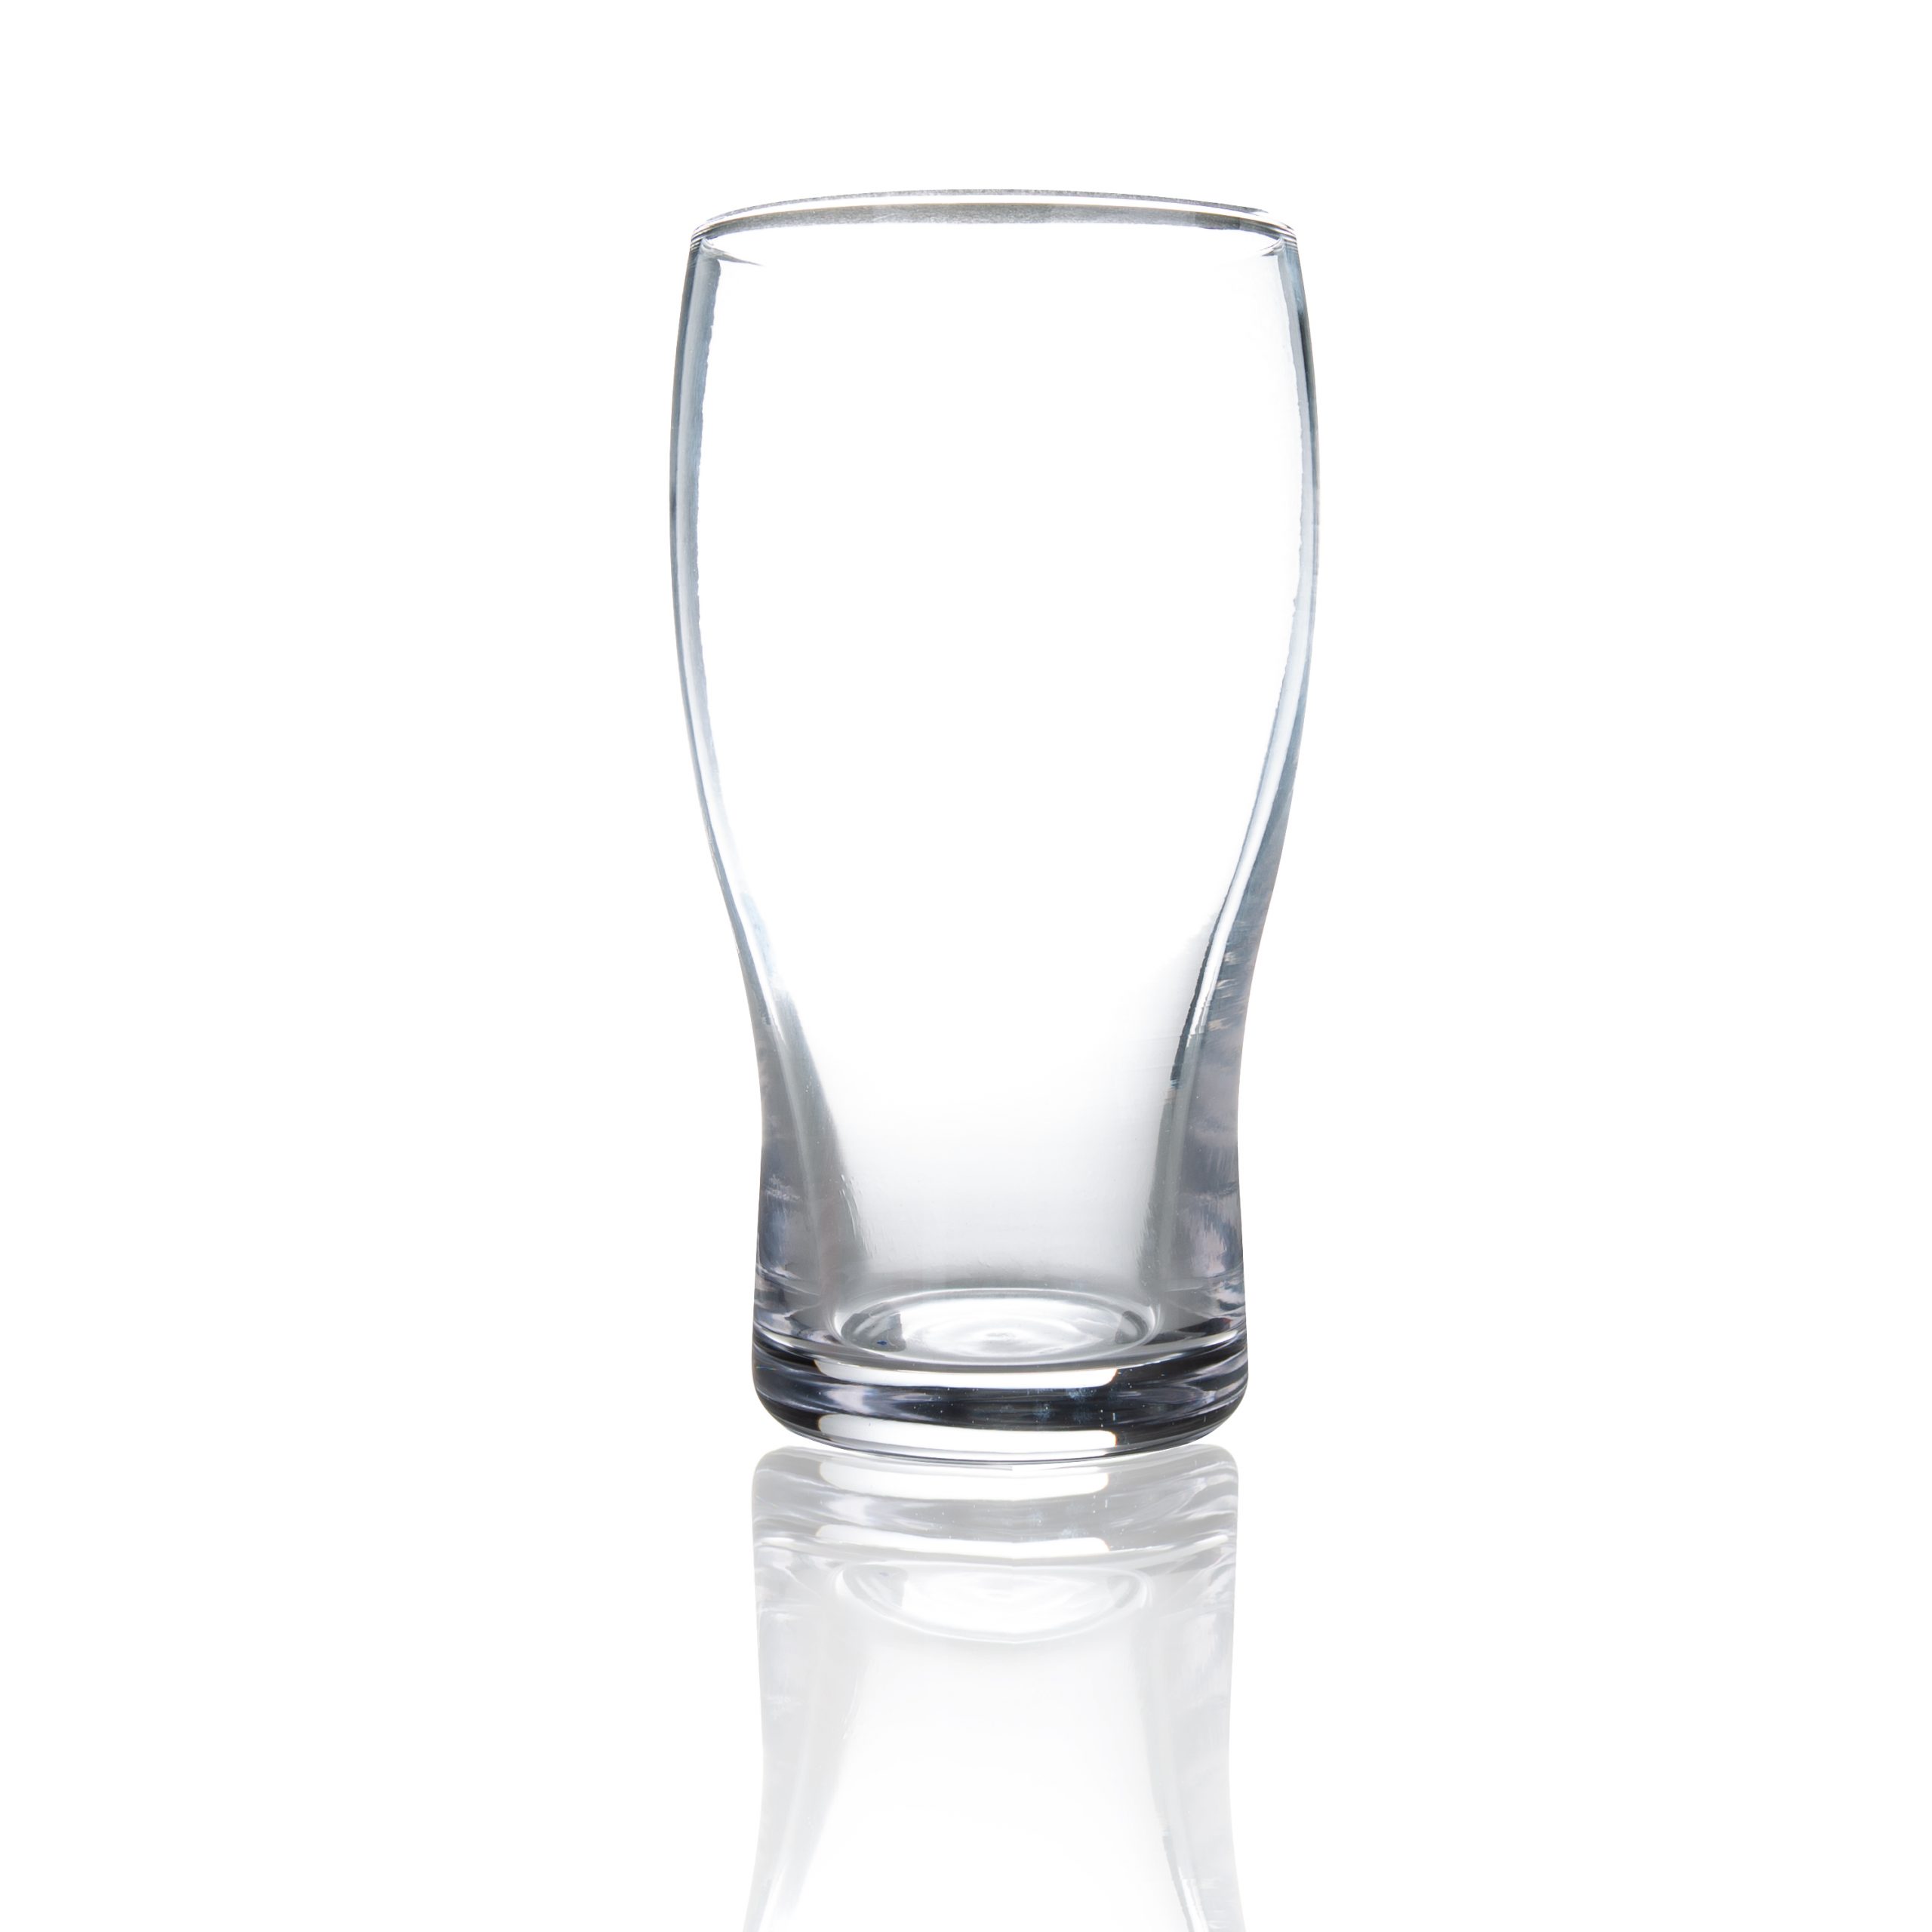 https://www.craftmastergrowlers.com/wp-content/uploads/2020/07/tulip-beer-glass-20oz-scaled.jpg